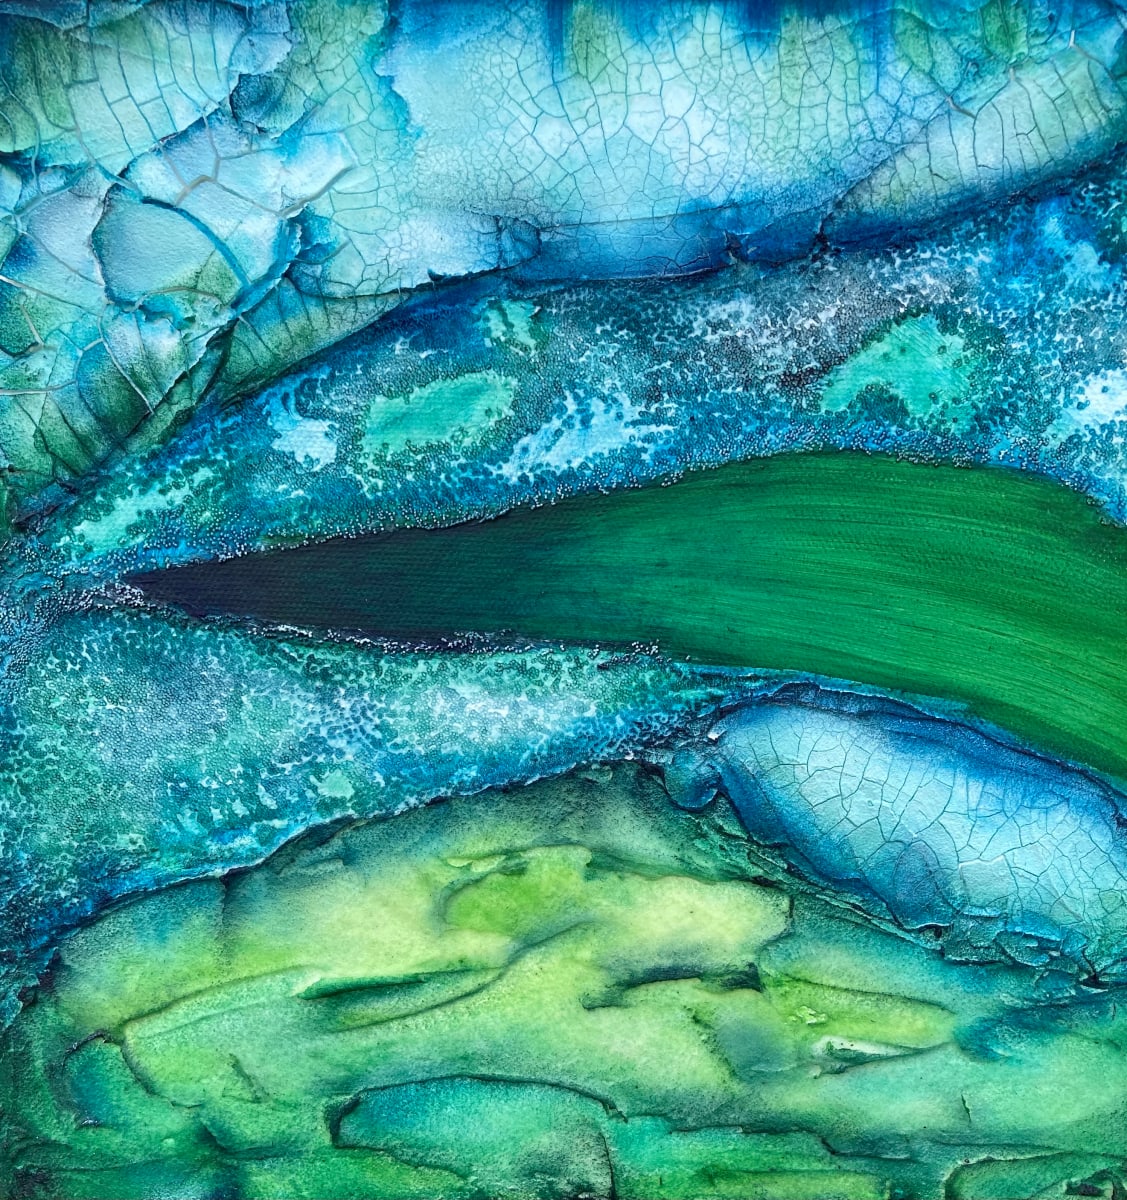 Petite Phiz by Jude Scott  Image: Decorative mixed media painting including glass beads. Donated to Art for Floods 2022. Acquired by Private Collector, proceeds to Norpa Theater Company via Art for Floods Appeal.